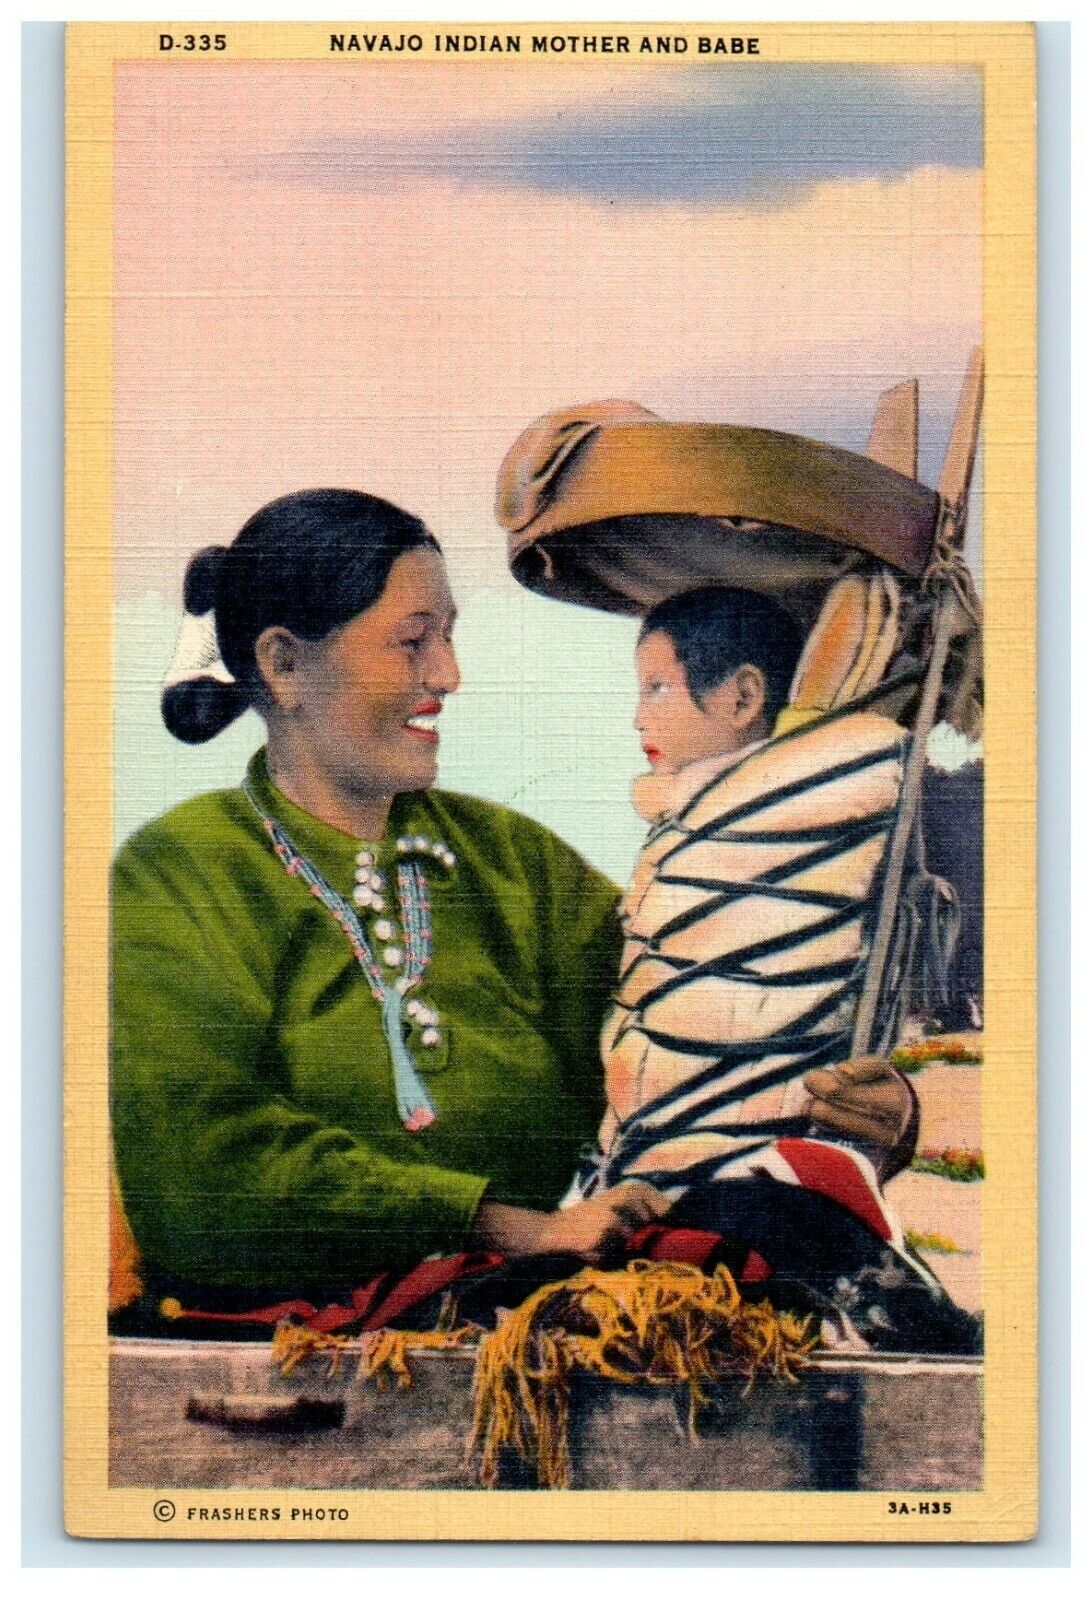 c1950's Navajo Indian Mother And Babe Frashers Photo Vintage Postcard